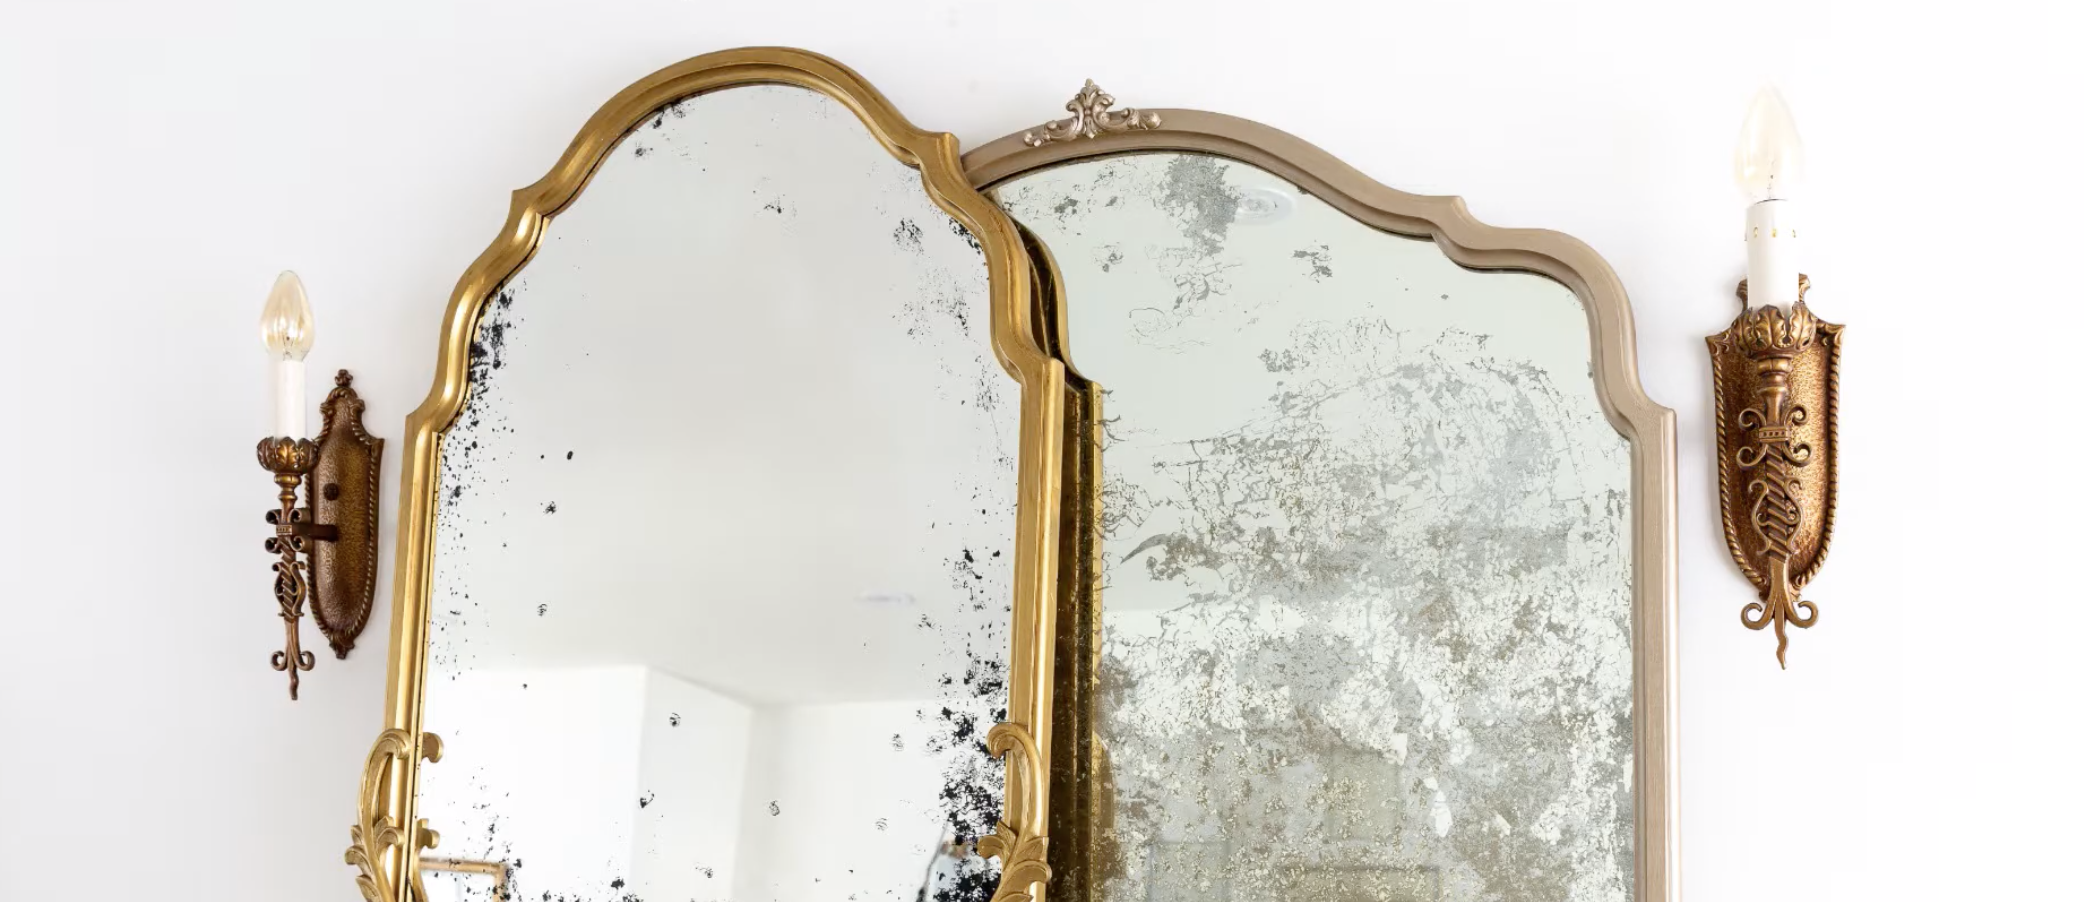 Antique mirror glass can be found in Sydney at Matra Glass